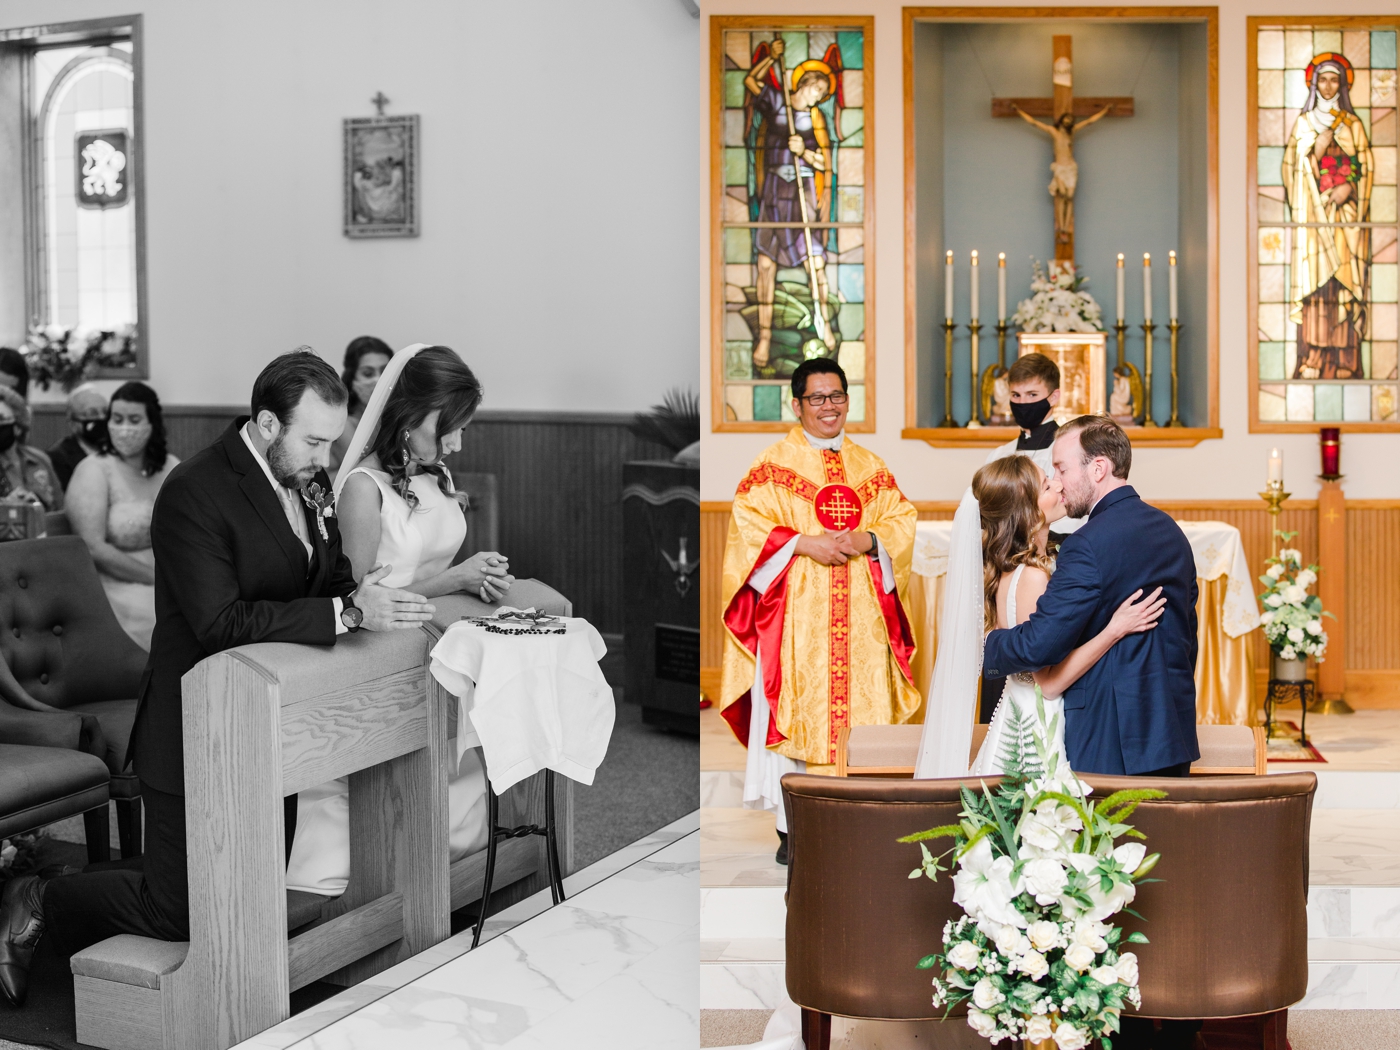 How I photograph wedding ceremonies, no matter where they are!